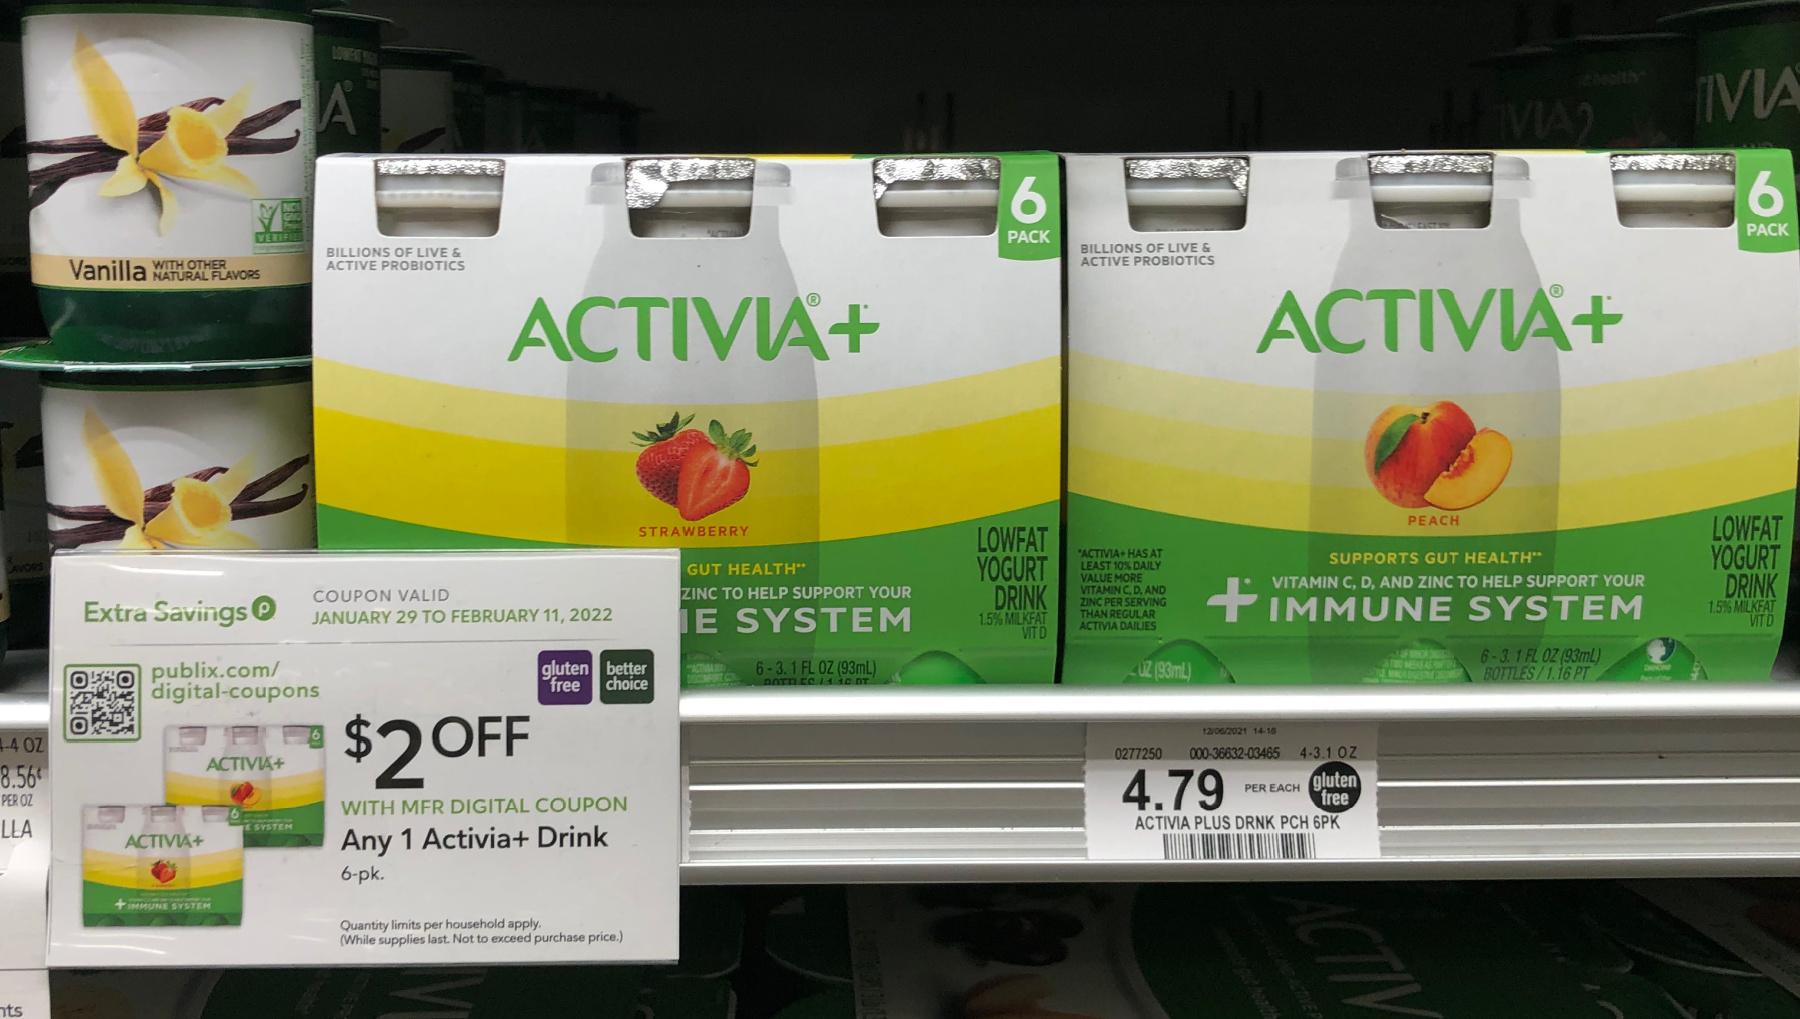 Big Savings On NEW Activia+ At Publix - Great Taste That Can Help Support Your Immune System on I Heart Publix